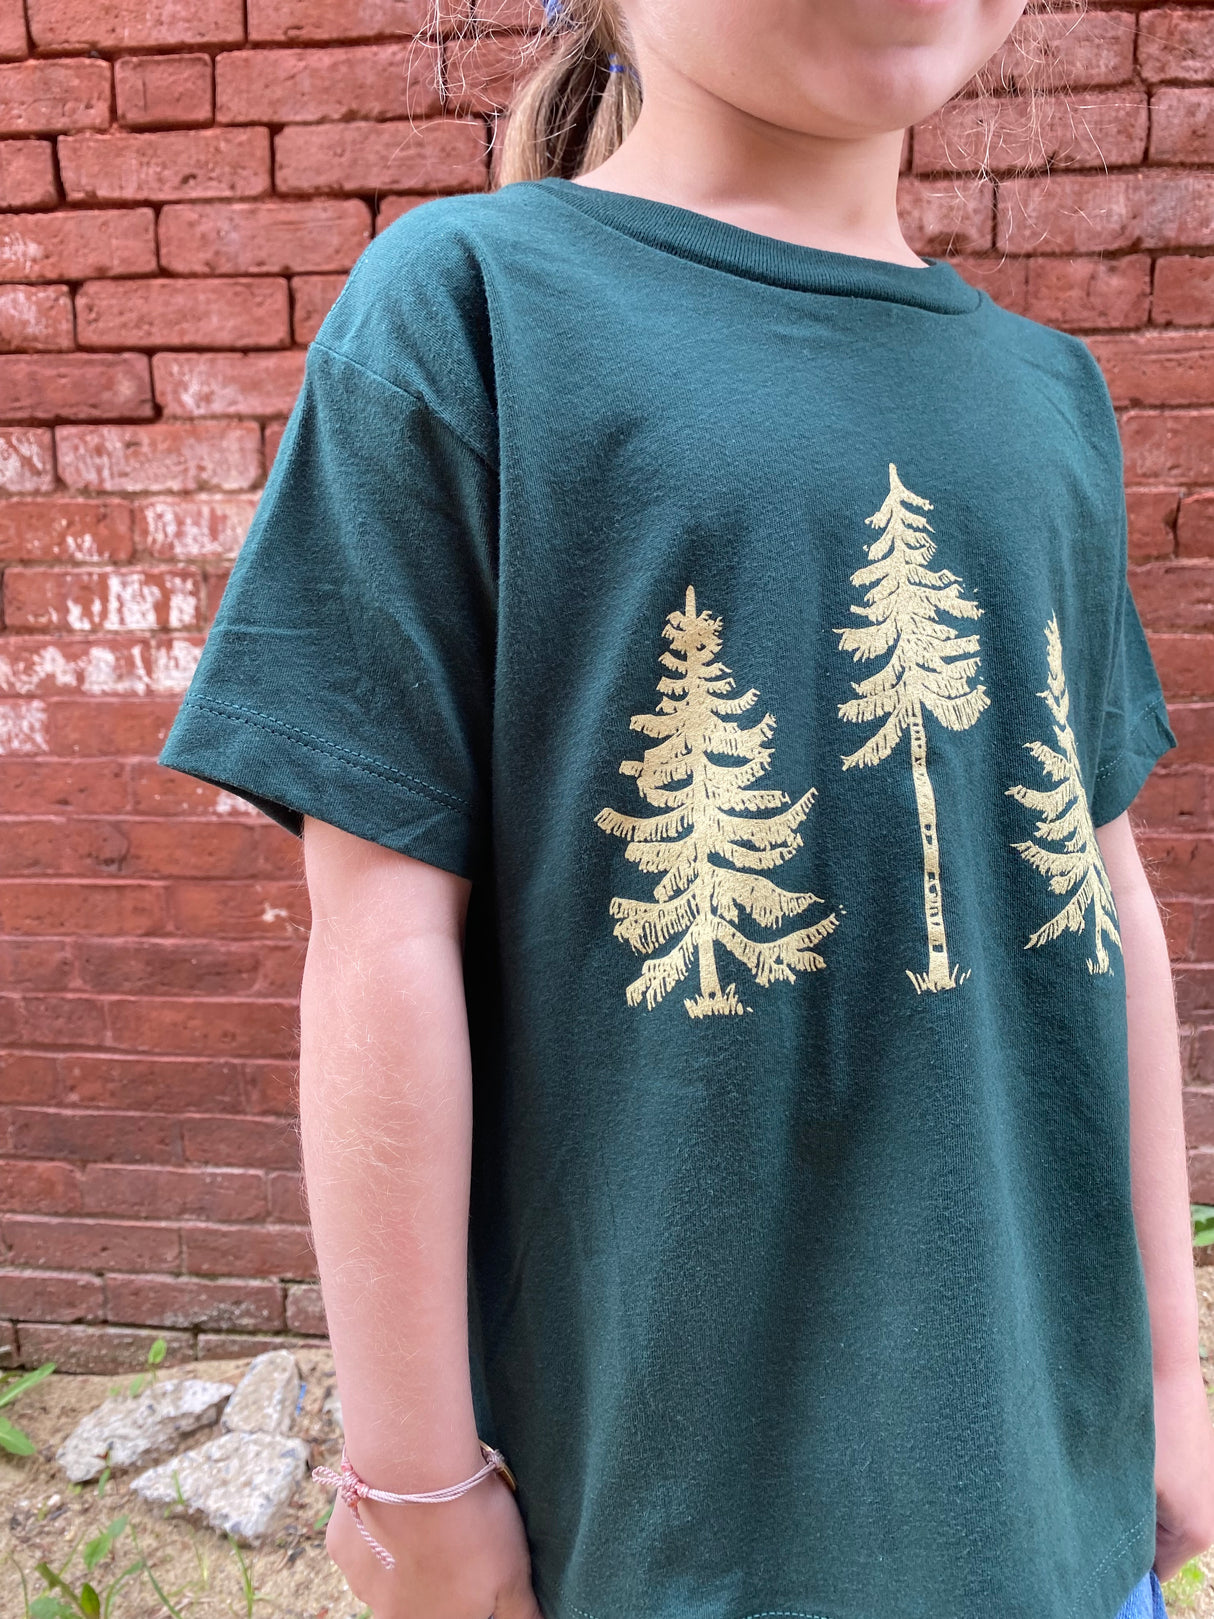 The Loon: Three Pines® Toddler Short Sleeve